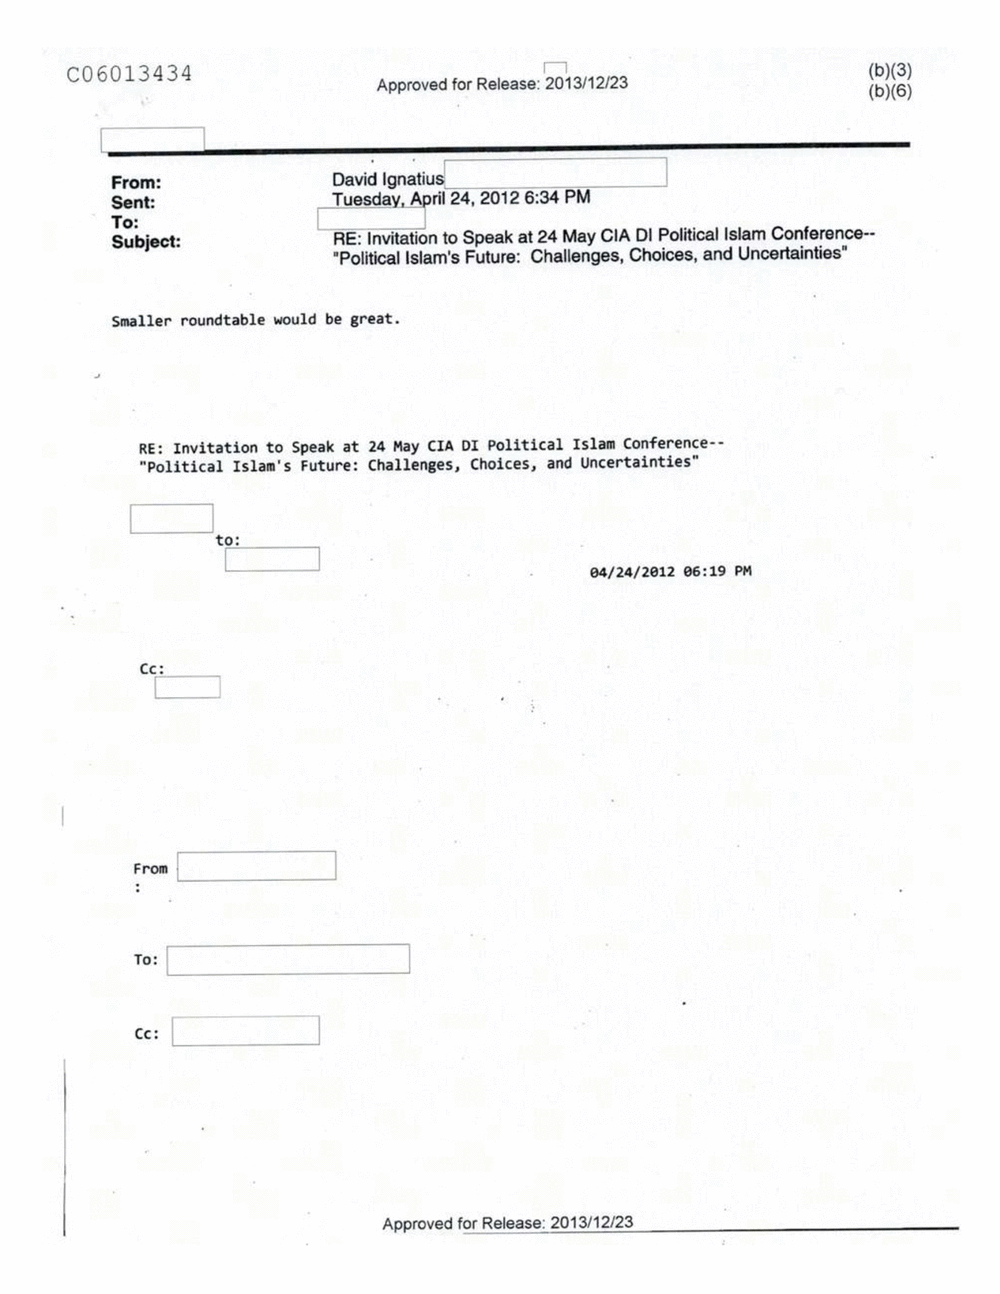 Page 294 from Email Correspondence Between Reporters and CIA Flacks